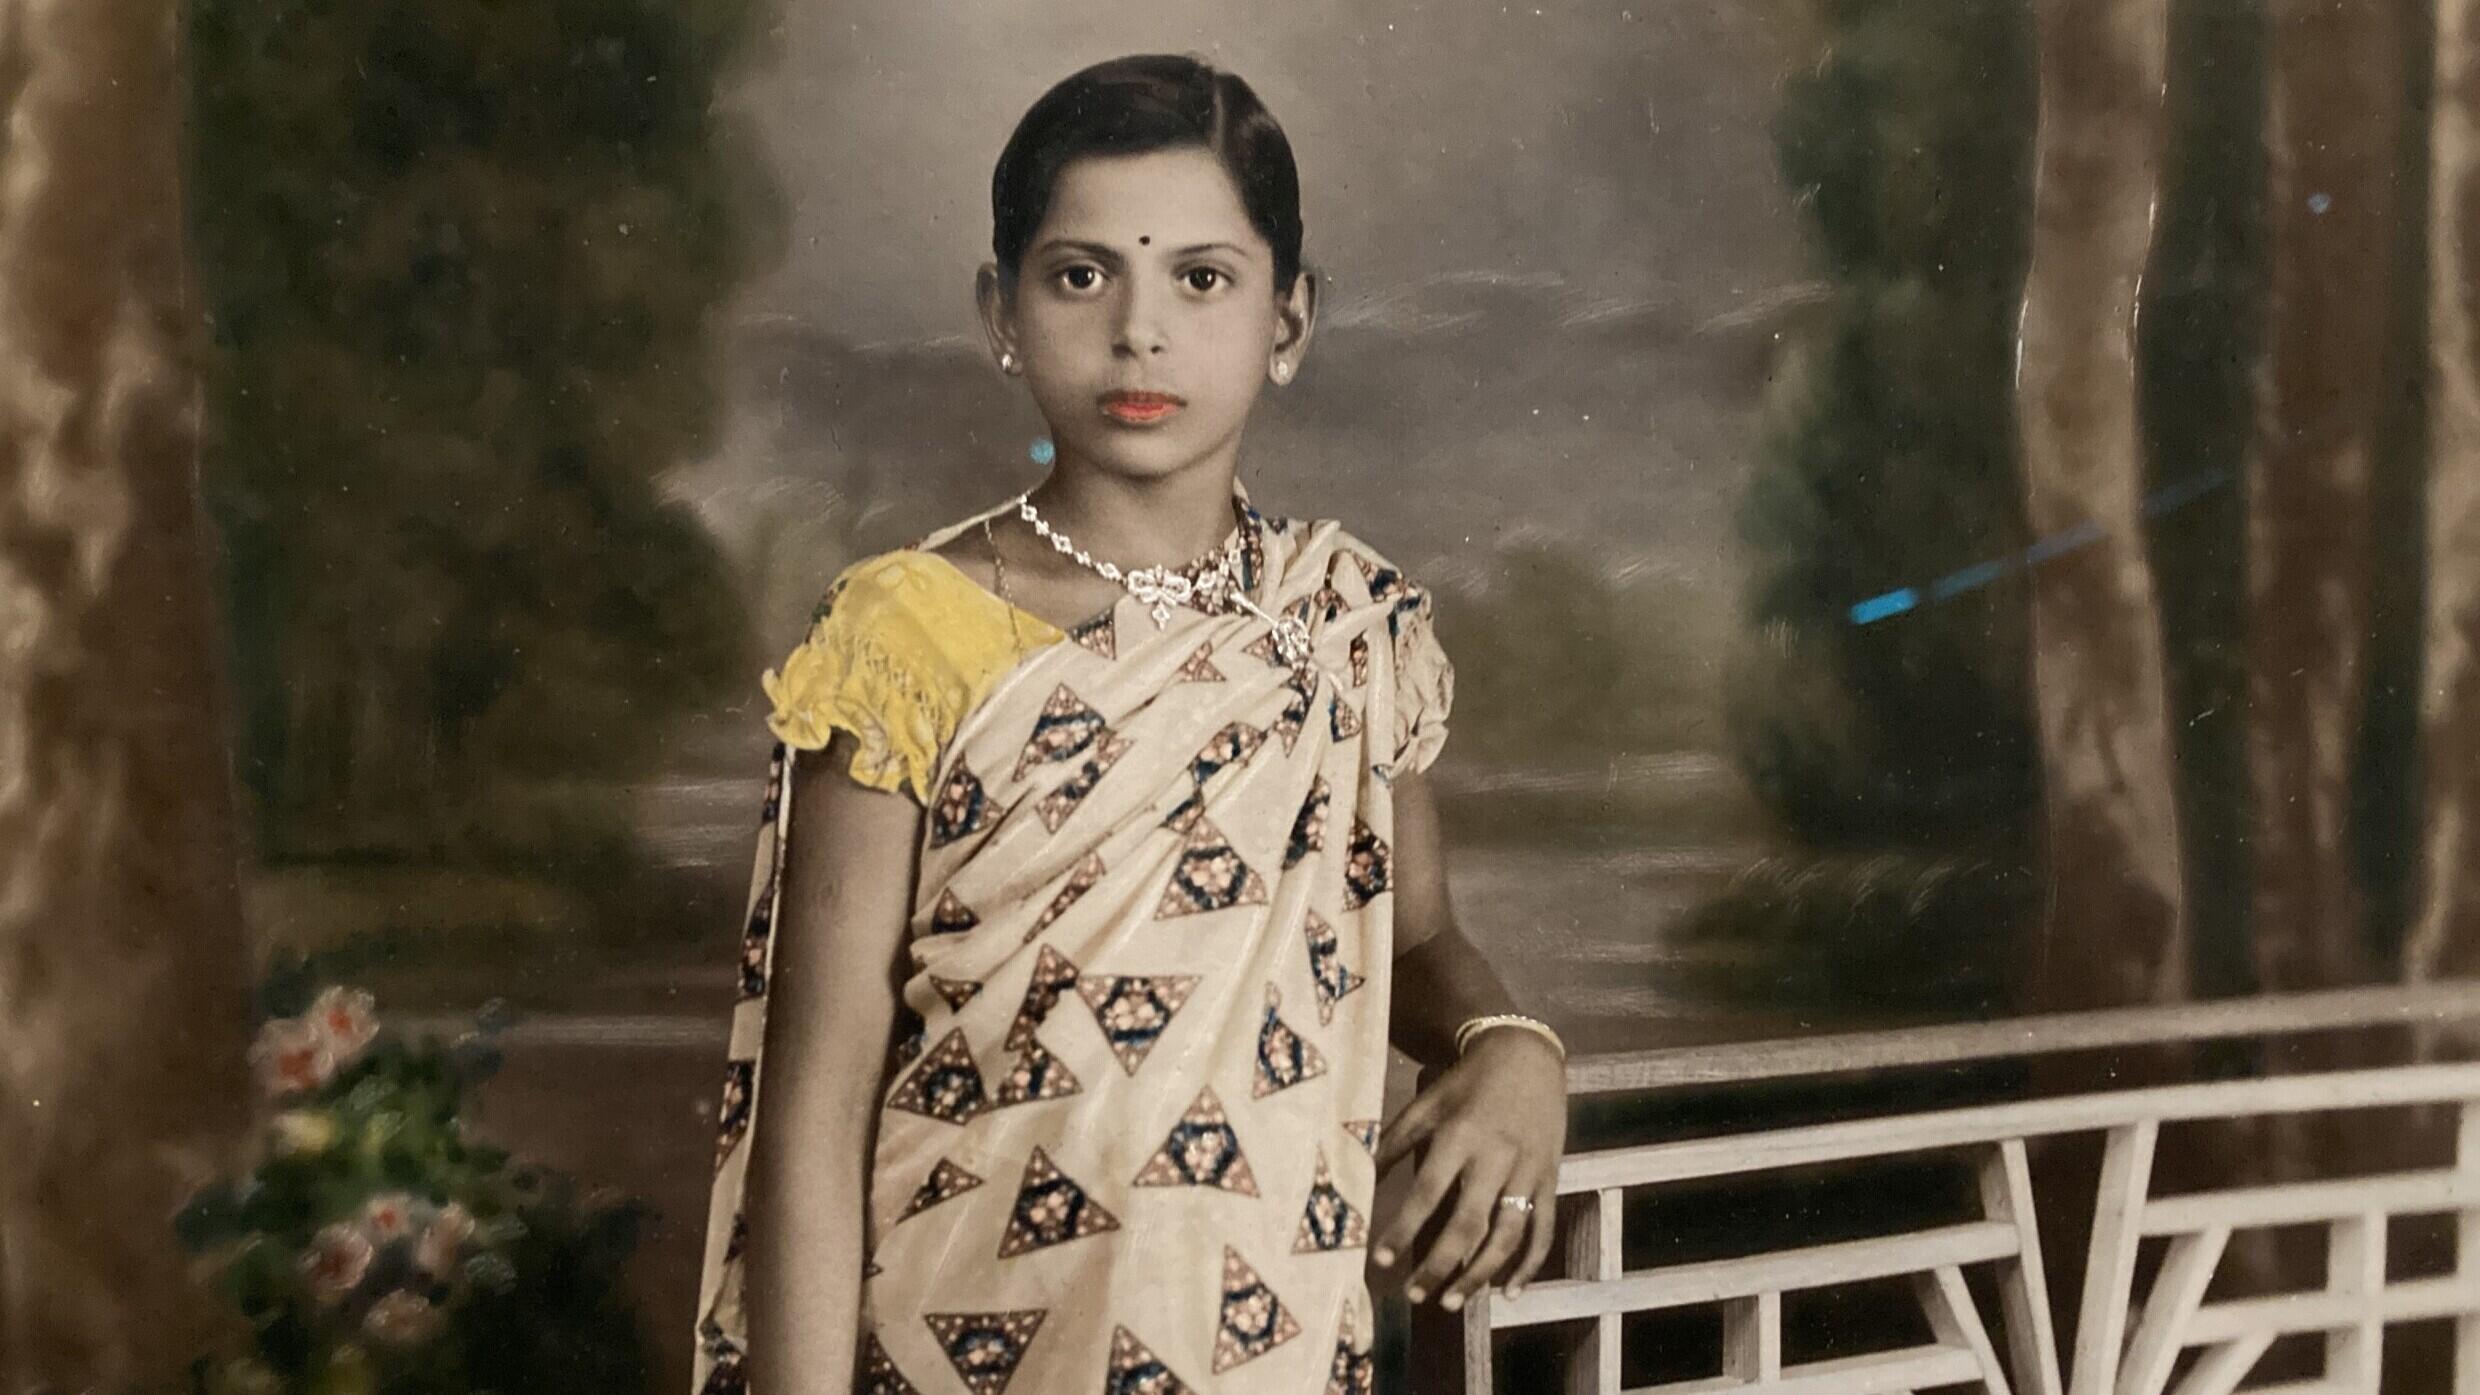 Painted photographic portrait (1940-1960), presented in the “Bollywood Superstars” exhibition at the Quai Branly museum in Paris.